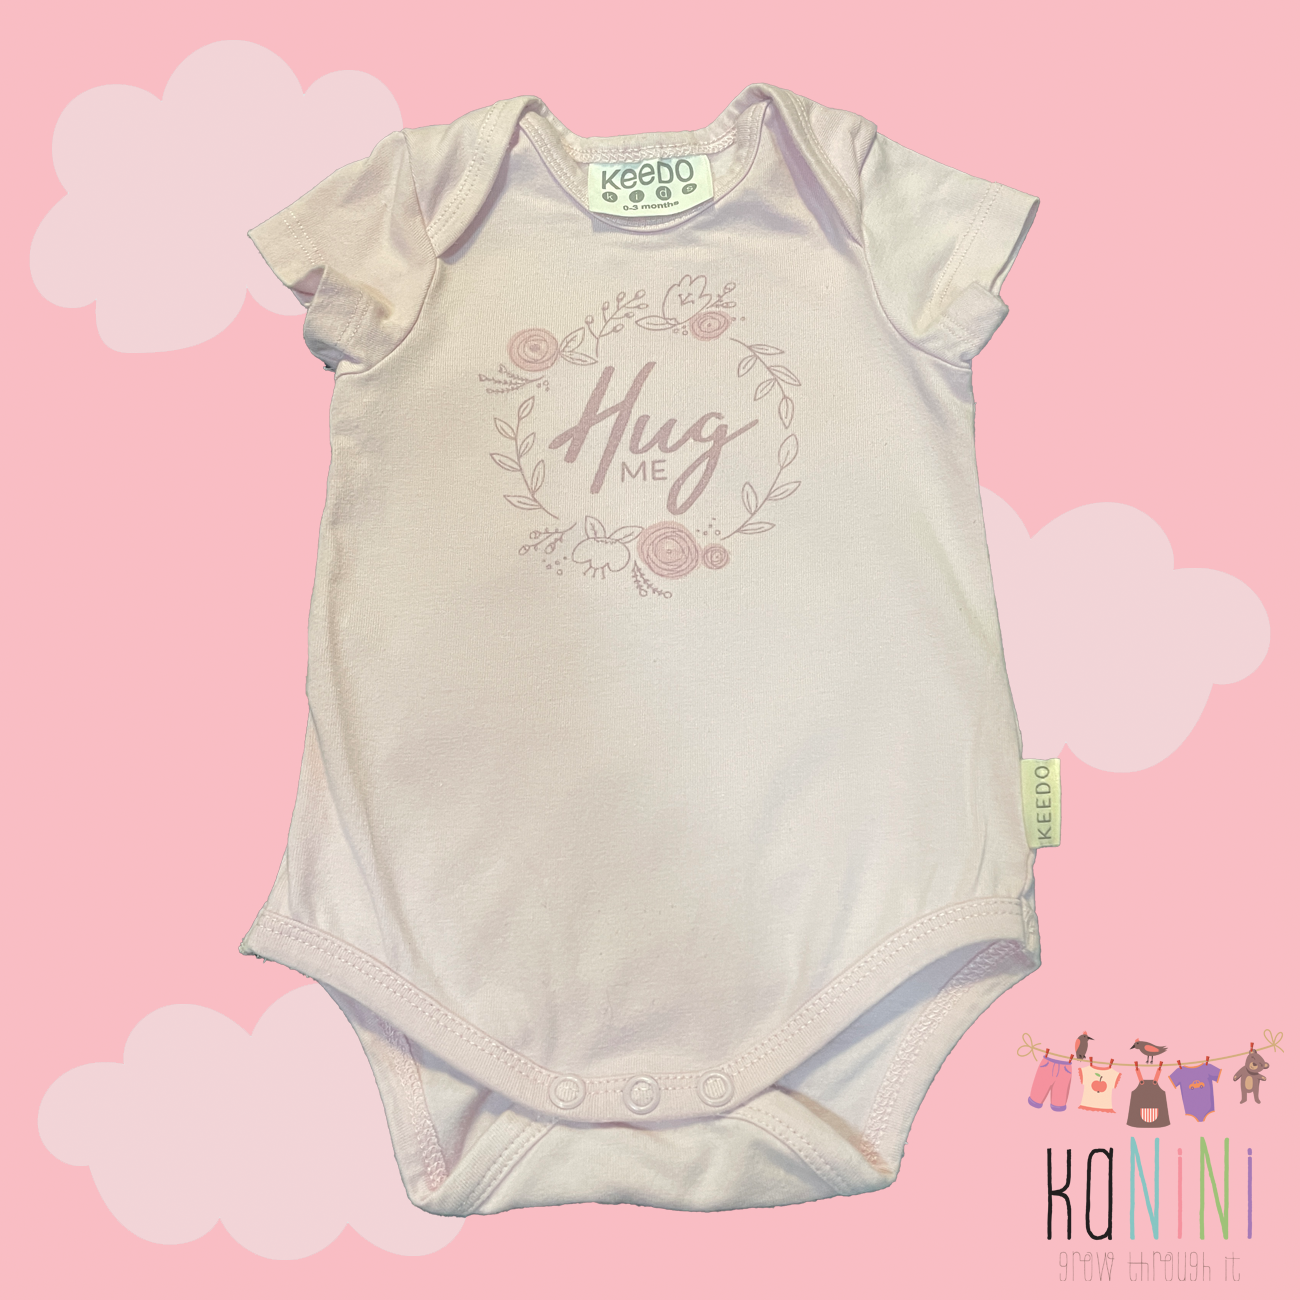 Featured image for “Keedo 0 - 3 Months Girls Short Sleeve Romper”